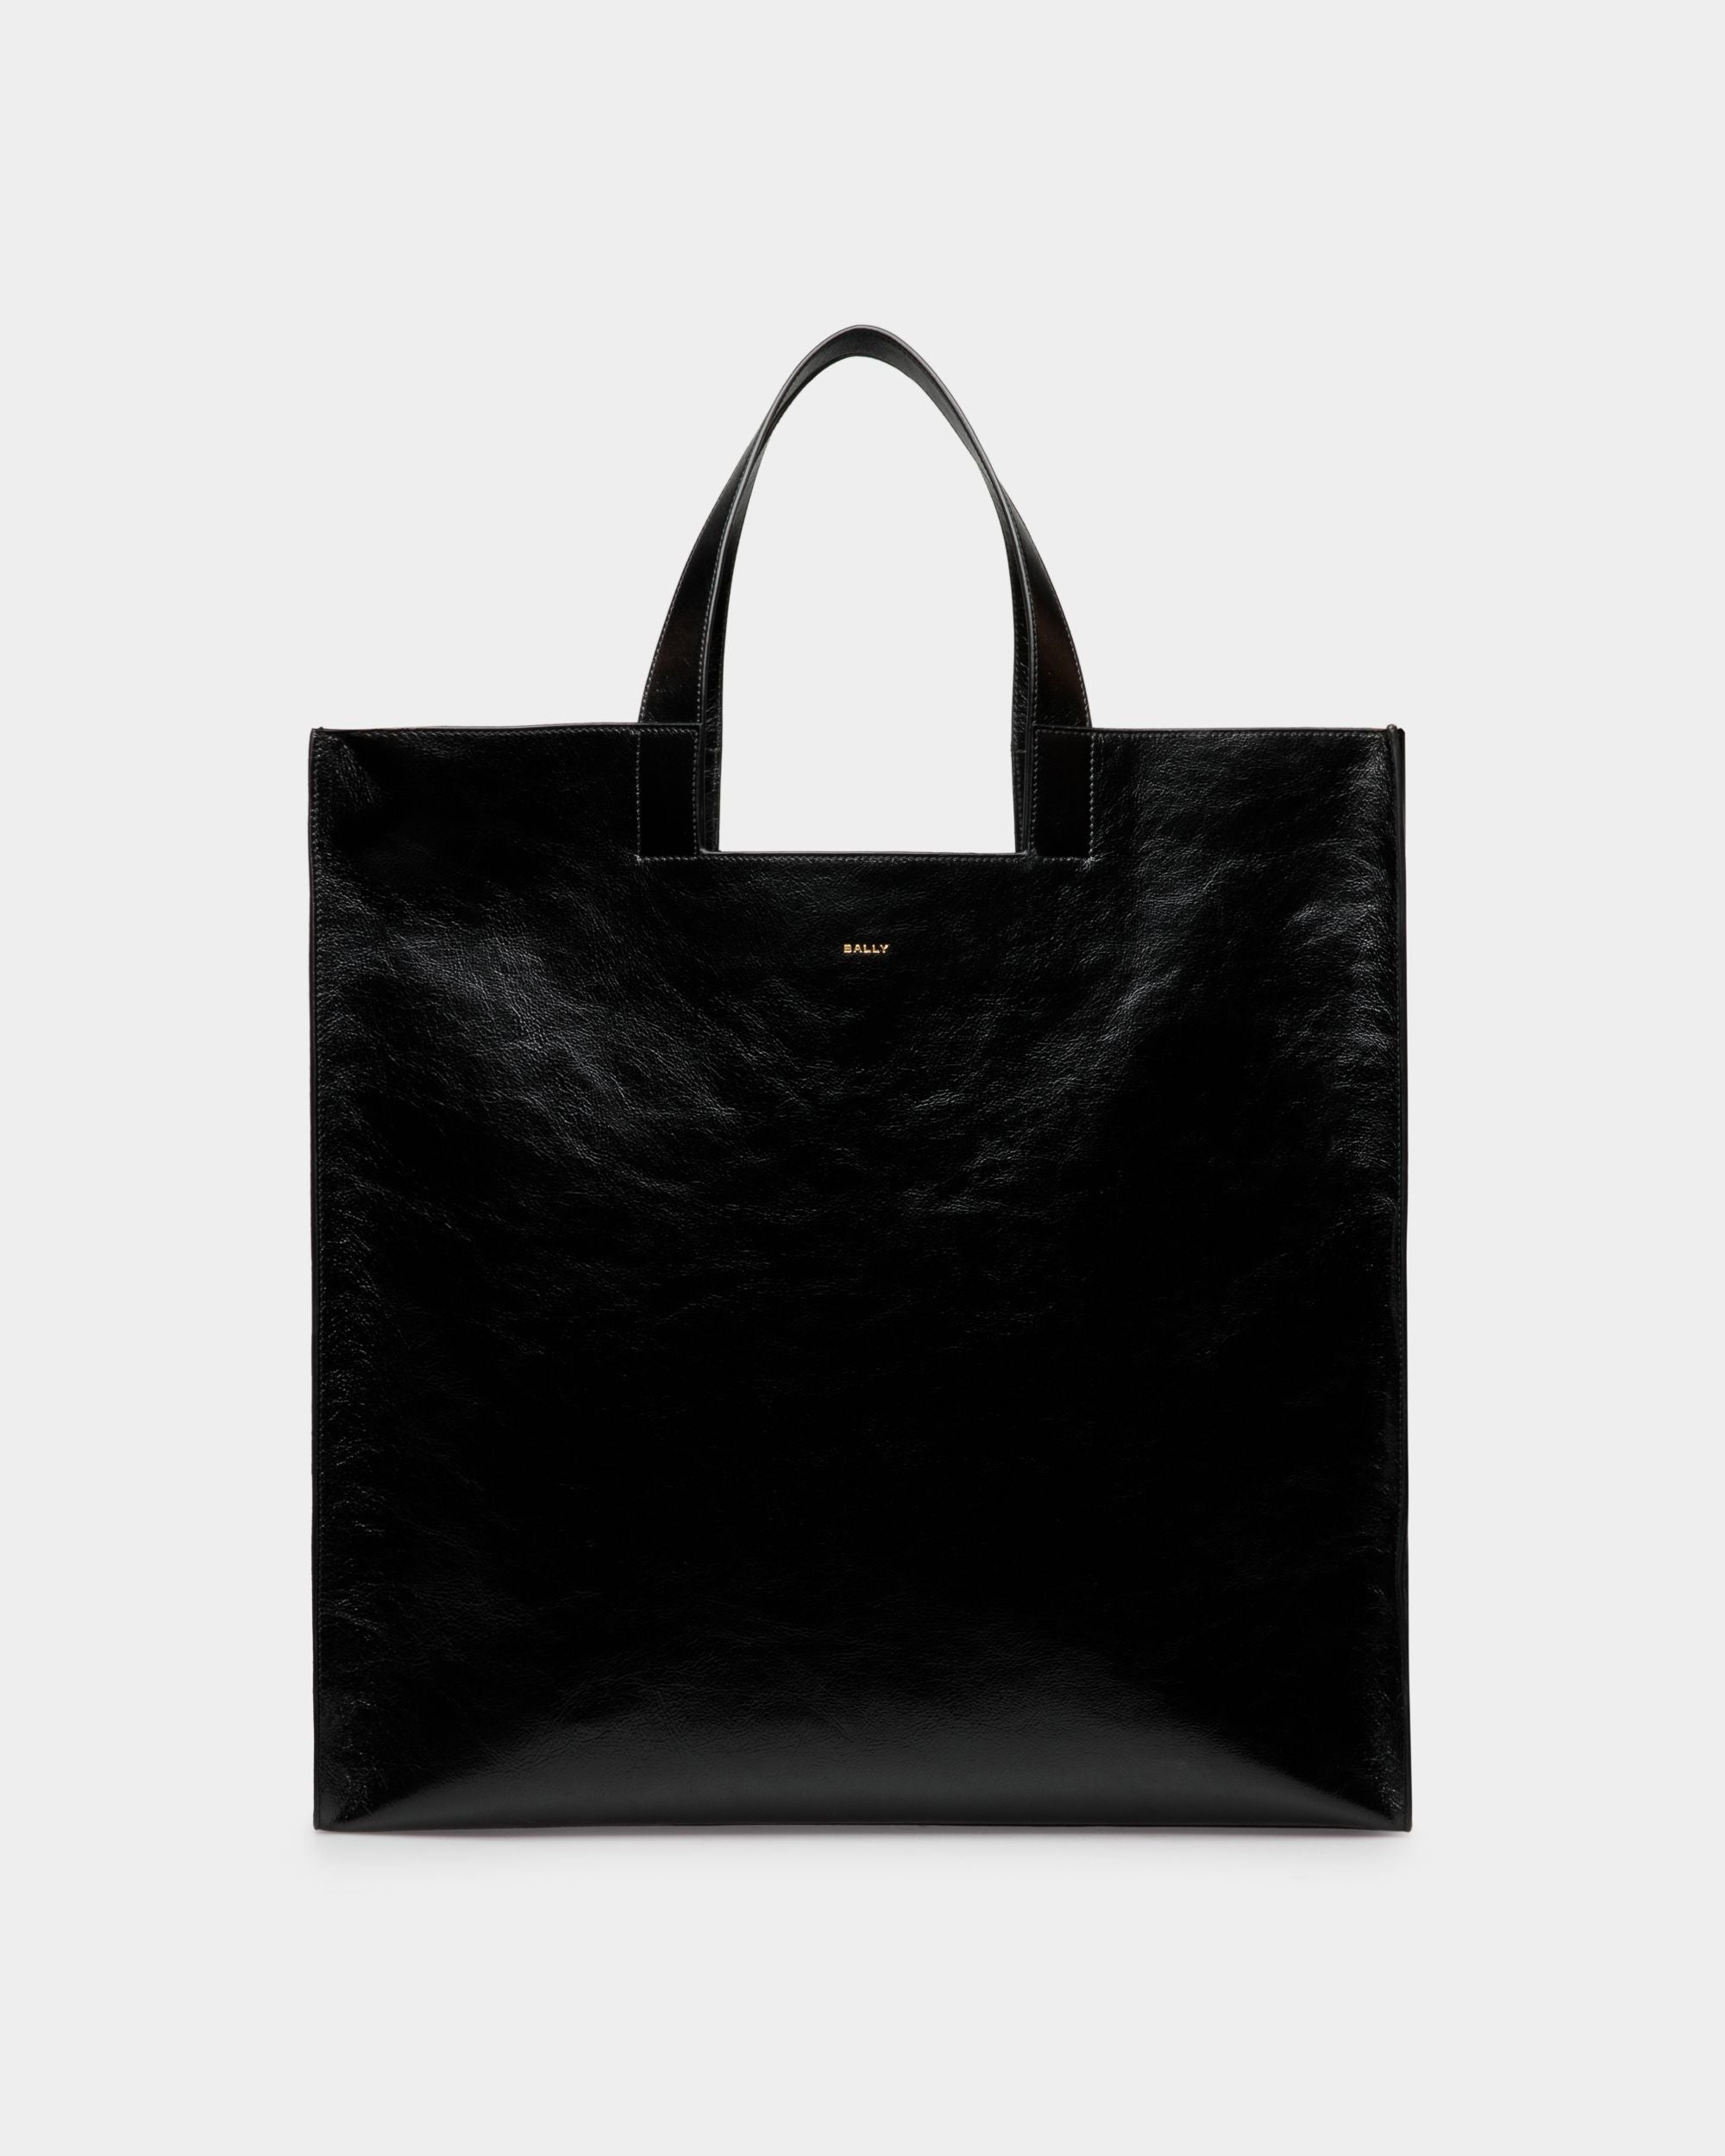 Easy Bally | Men's Tote in Black Leather | Bally | Still Life Front